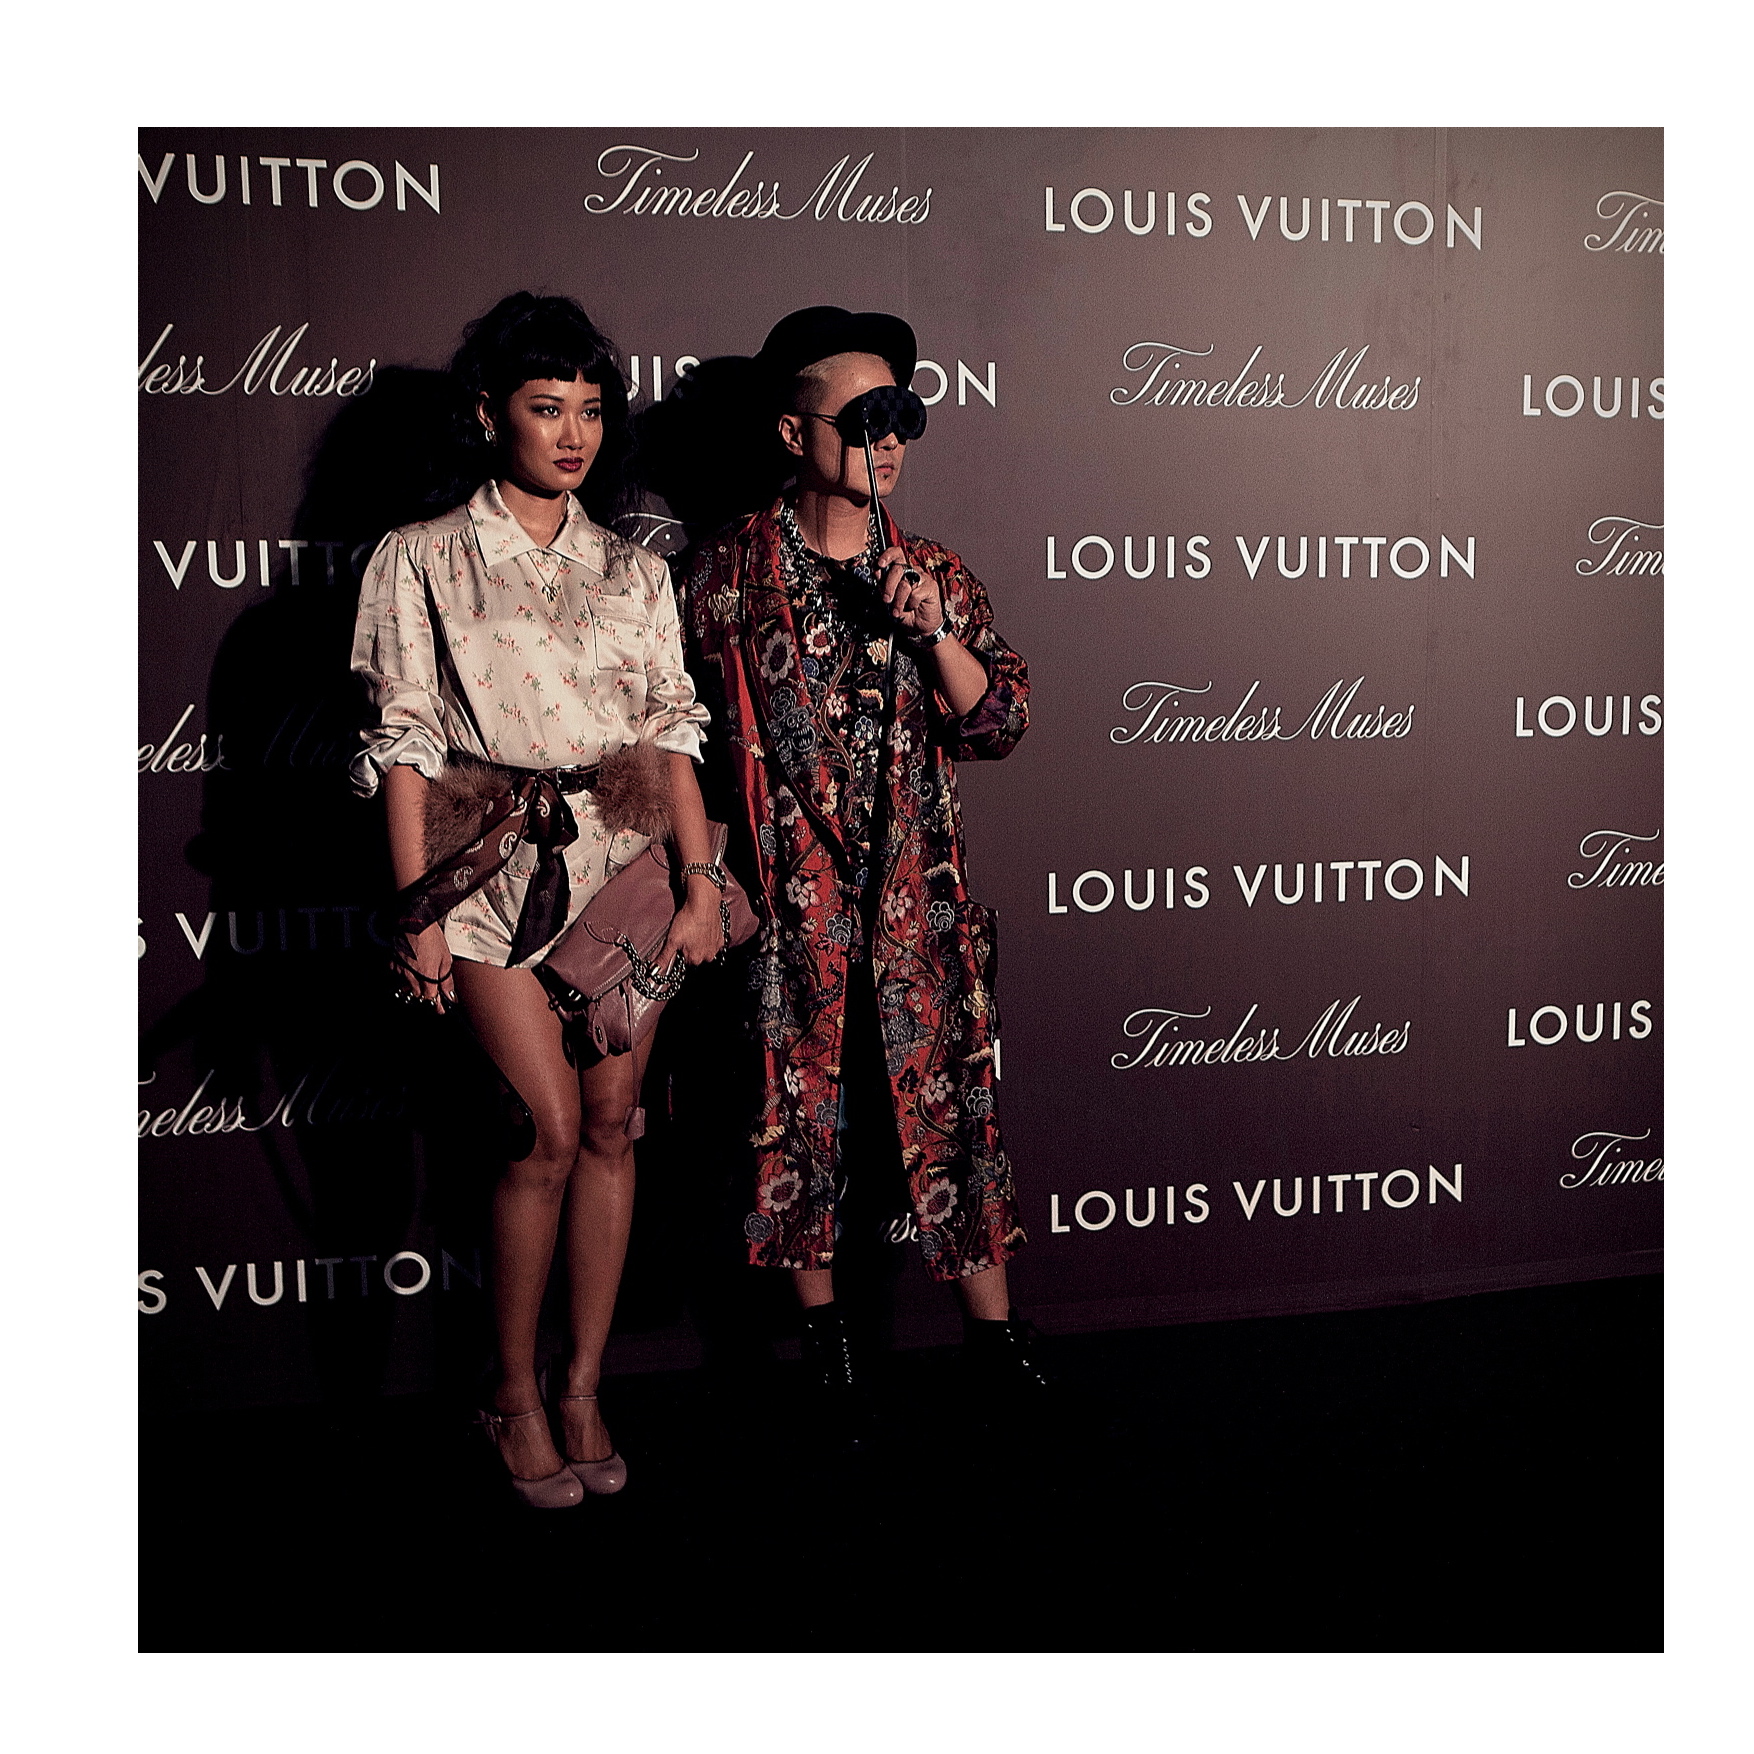 Princess Tenko and Patrick-Louis Vuitton at the 'Timeless Muses